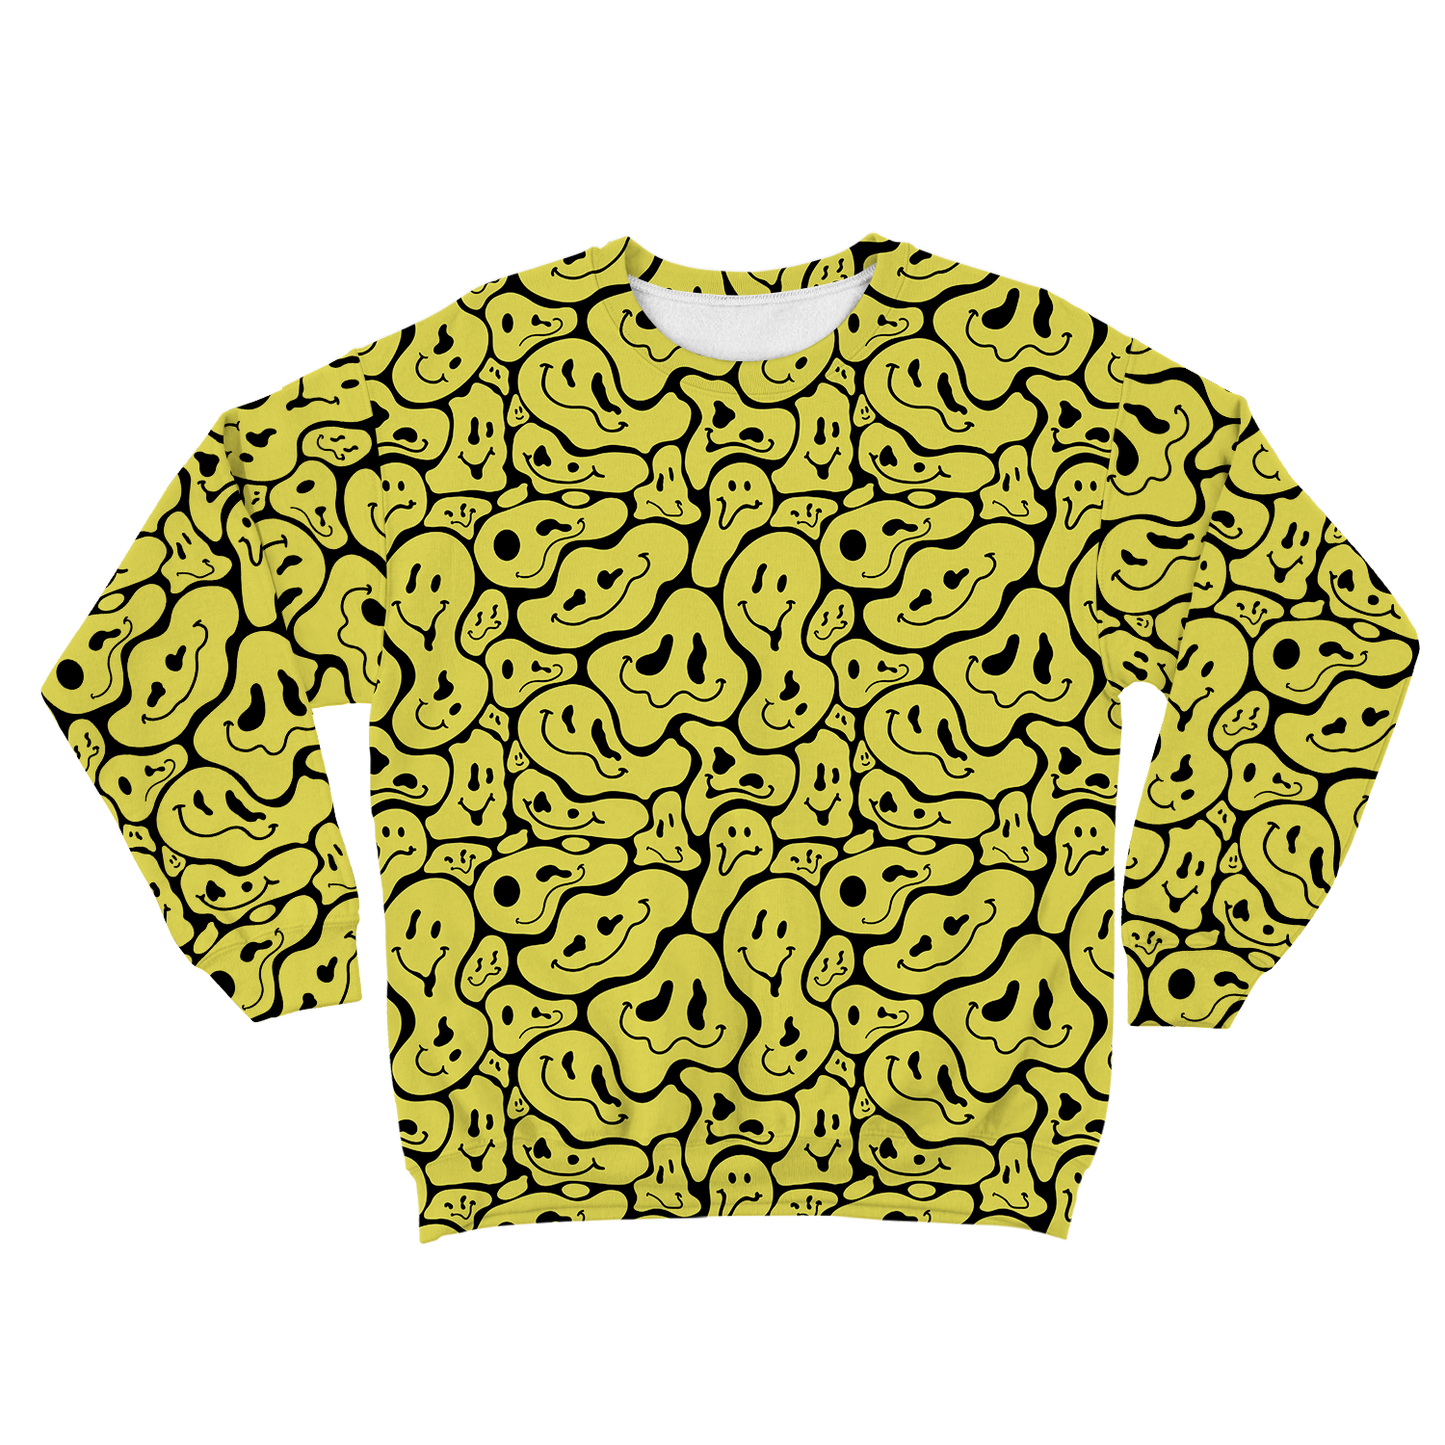 Trippy Smiley Faces All Over Print Unisex Sweatshirt